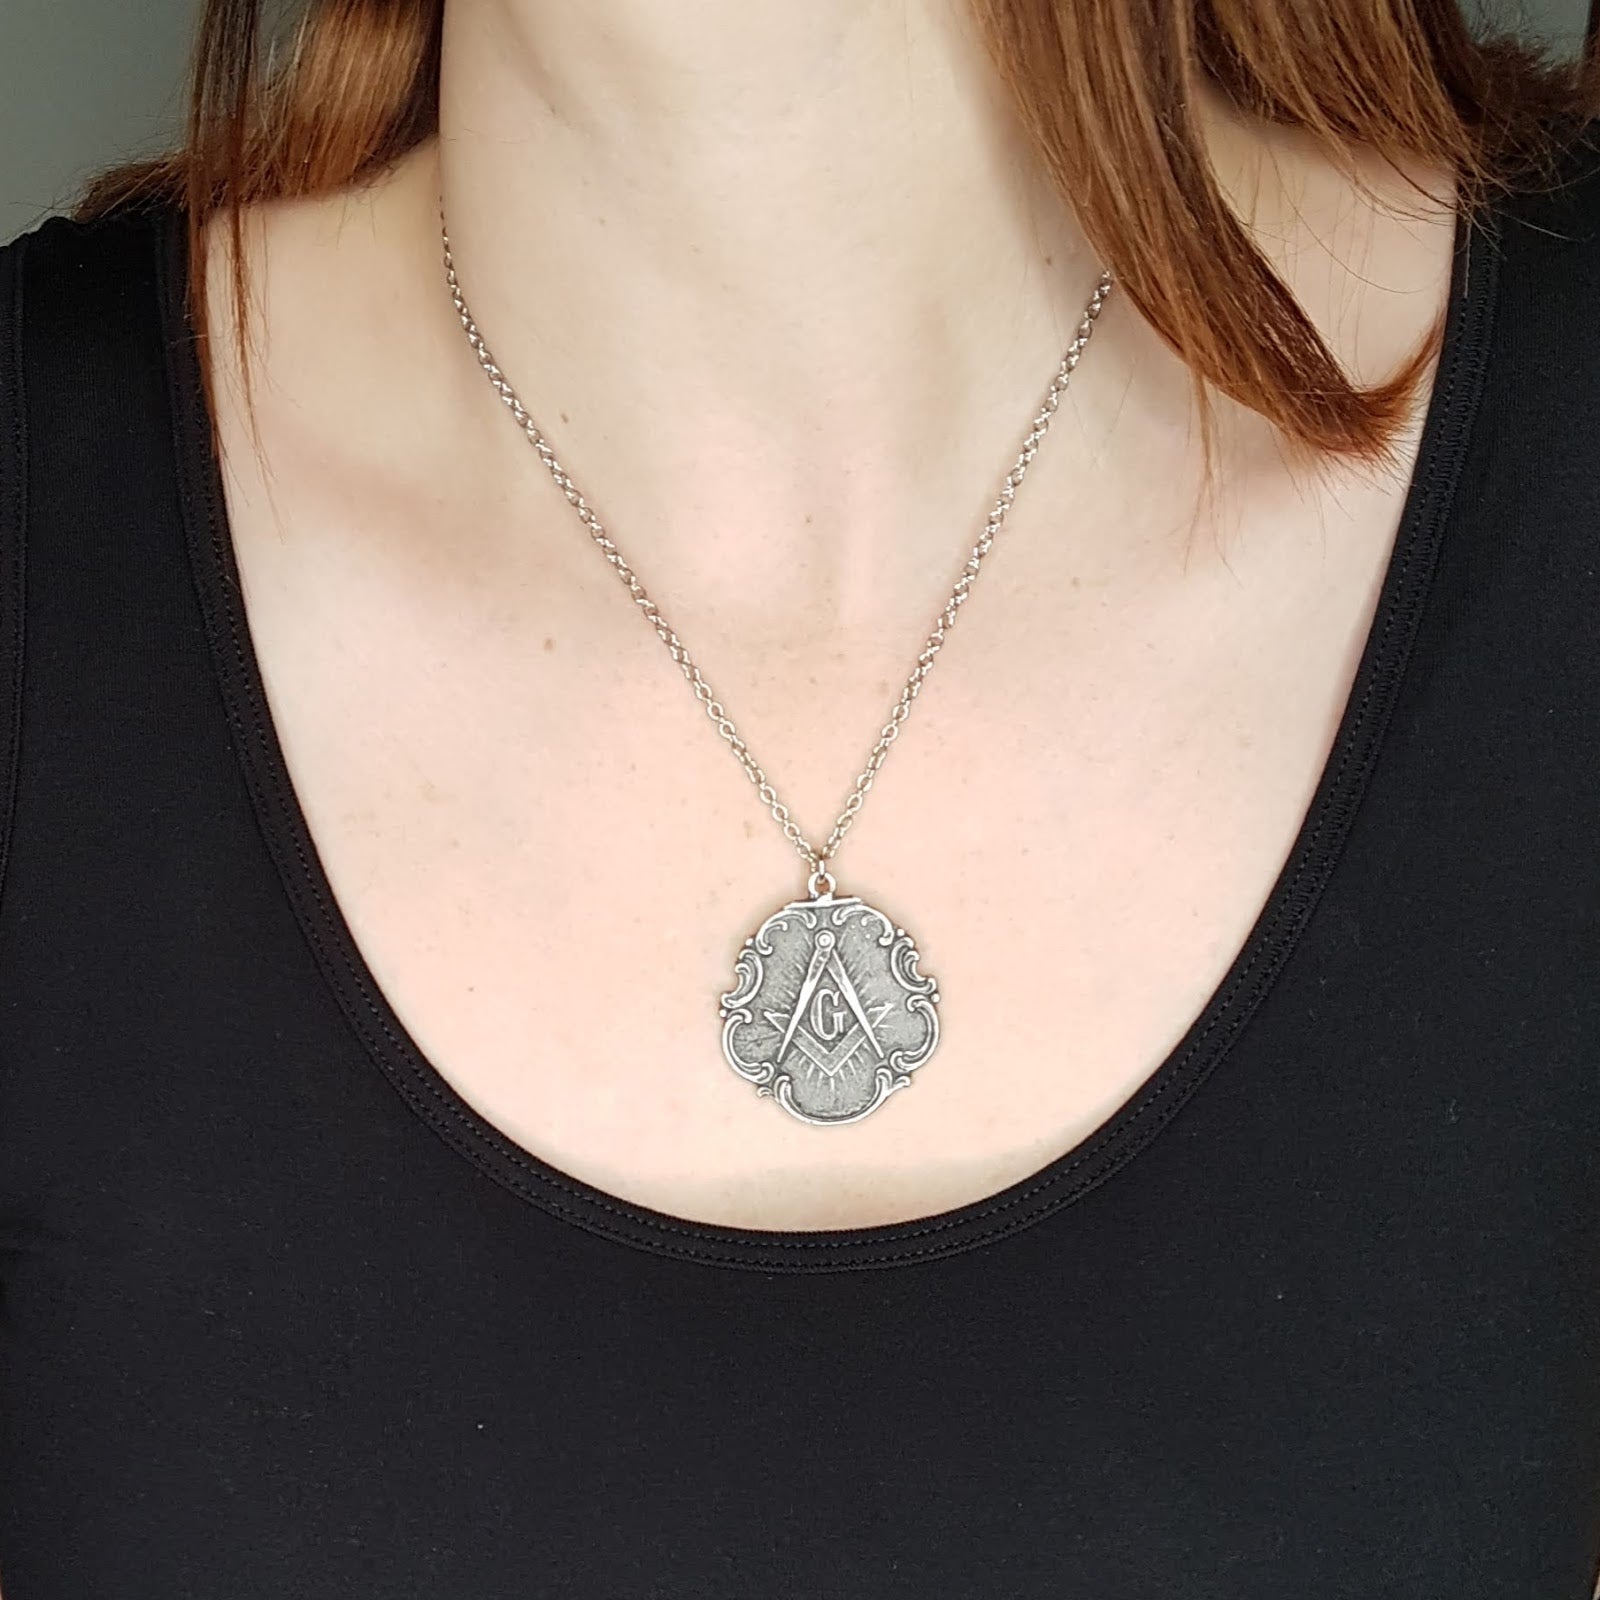 Free Mason Square and Compasses Necklace - Gwen Delicious Jewelry Designs